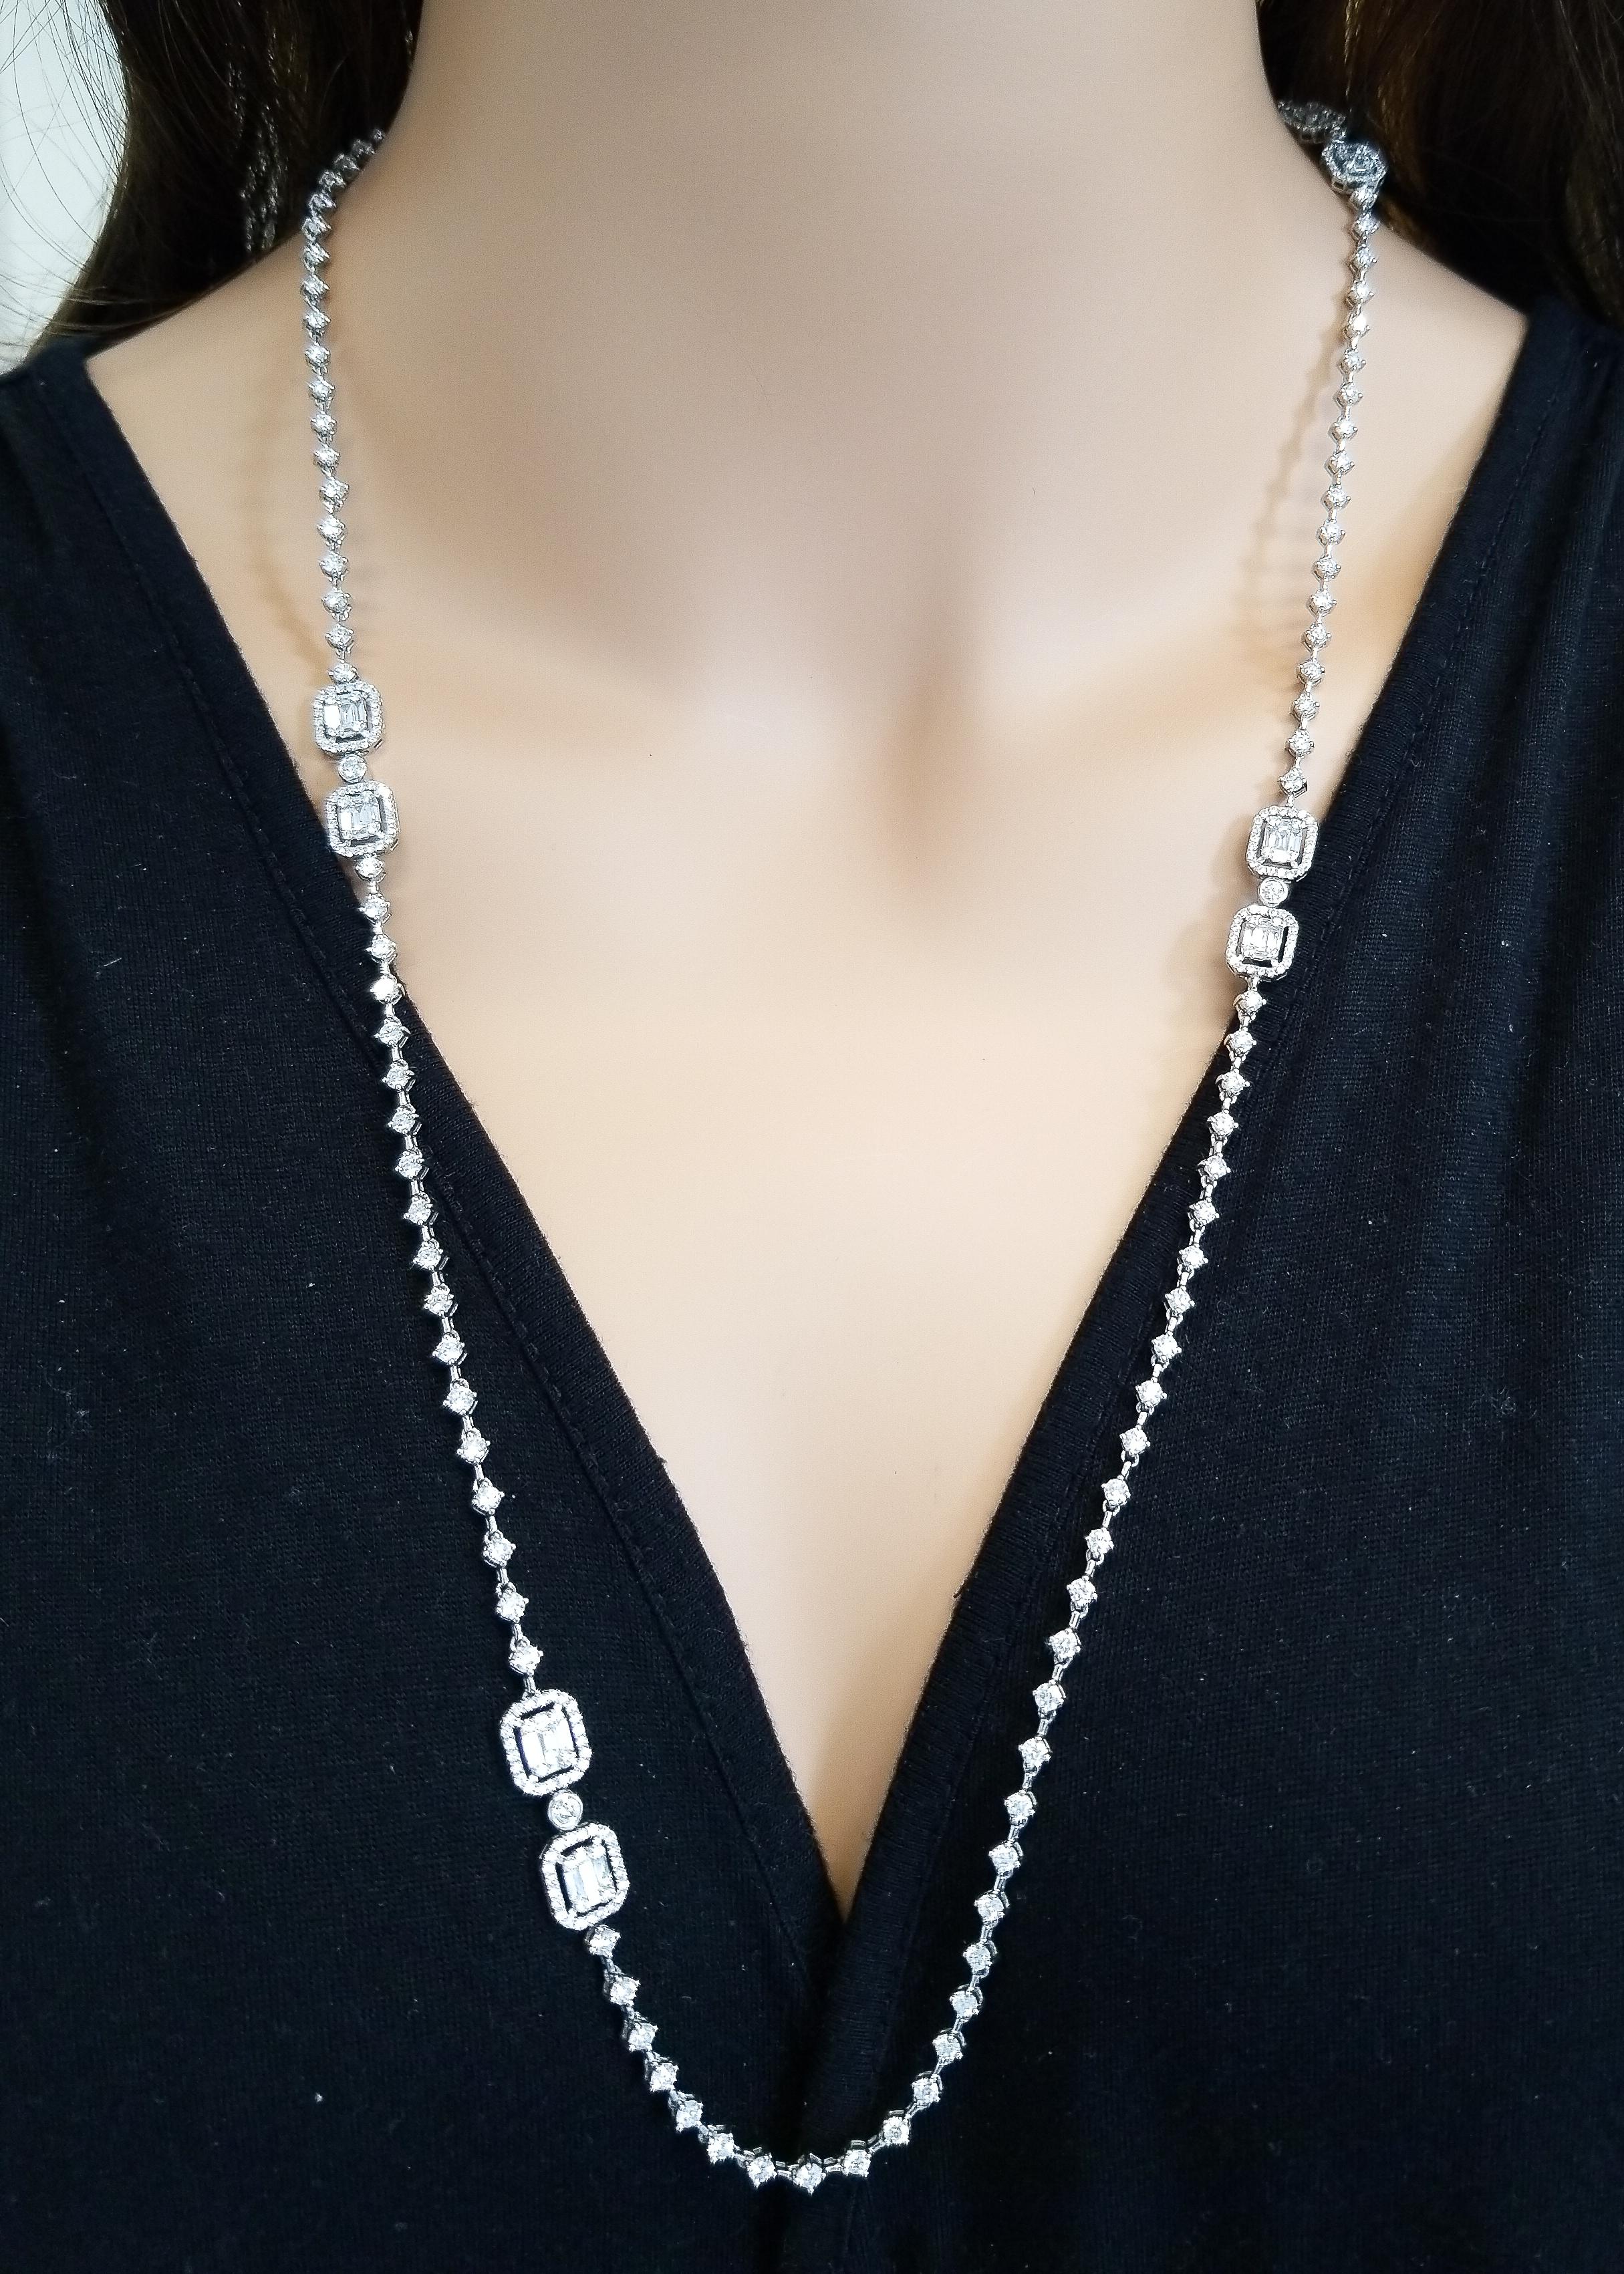 Two layering strands of diamond decadence make this stunning art deco necklace. Round brilliant cut diamonds adorn both strands in round shaped links totaling 7.50 carats. Shimmering baguette cut diamonds are jauntily set in intervals on both